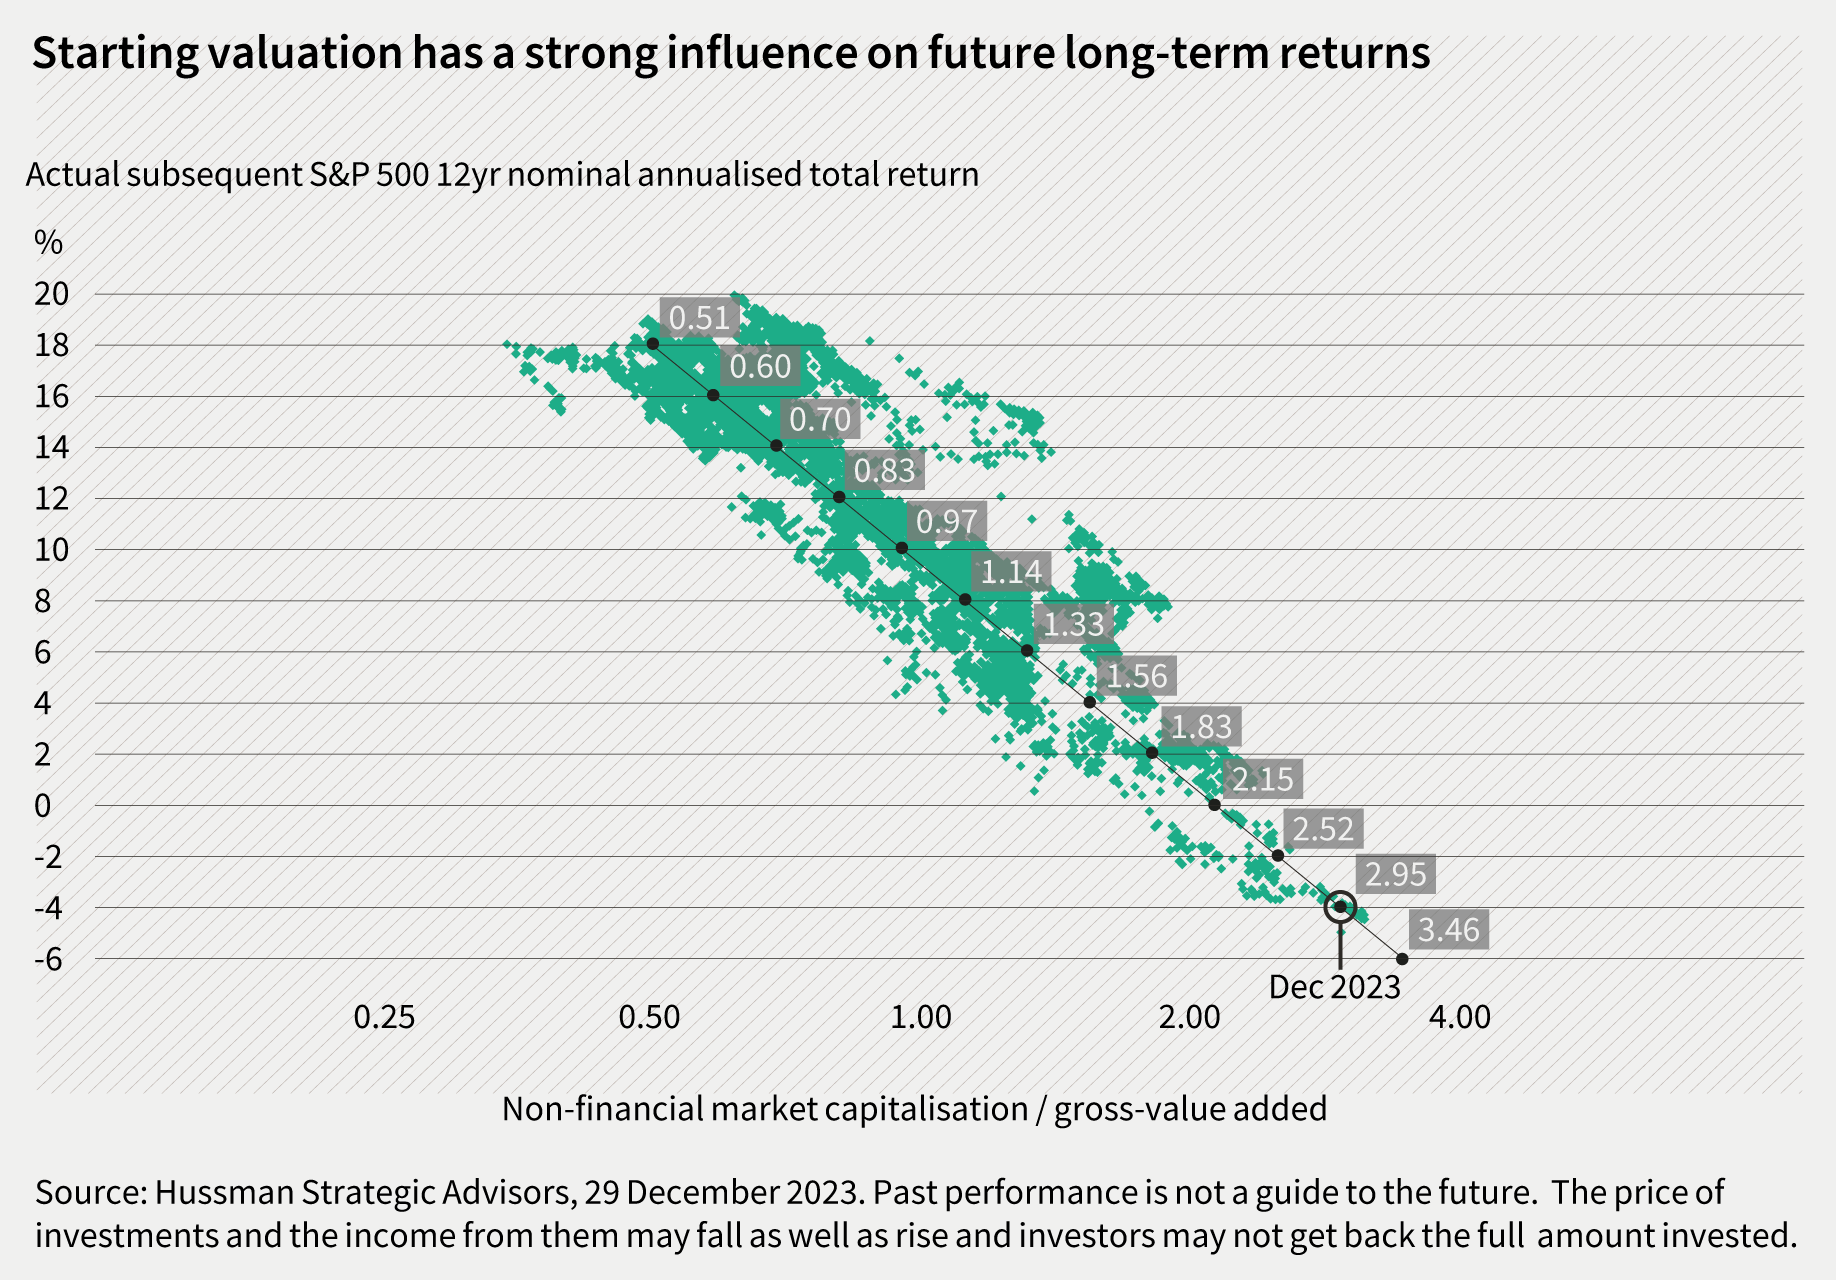 Starting valuation has a strong influence on future long-term returns